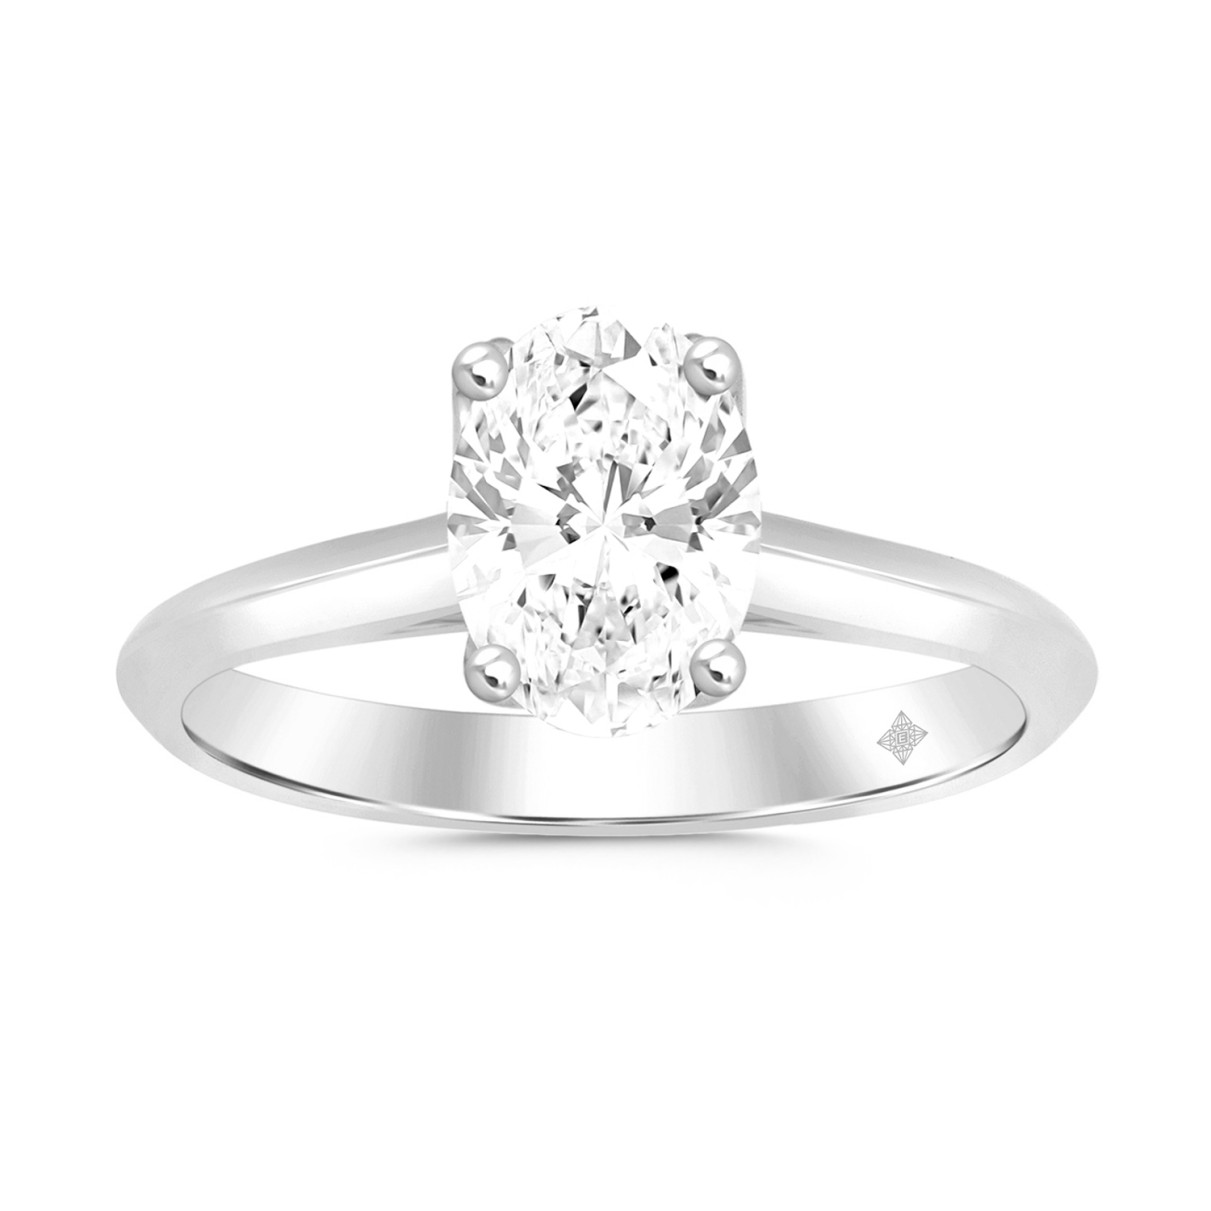 LADIES SOLITAIRE RING 1 1/2CT OVAL DIAMOND 14K WHI...